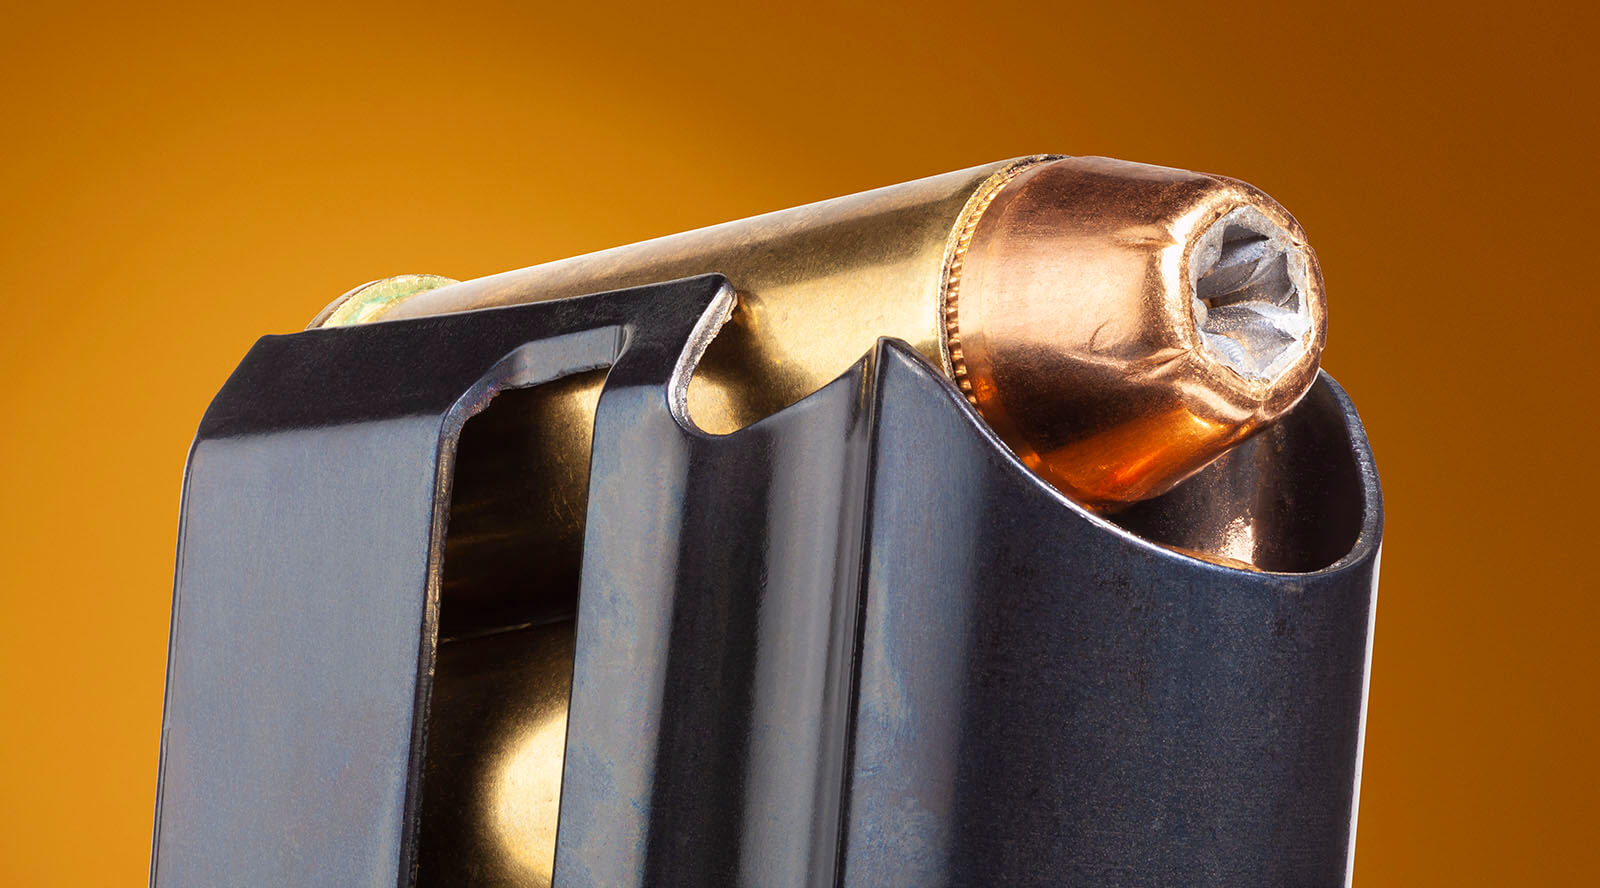 Why You Should Use Self-Defense Ammo